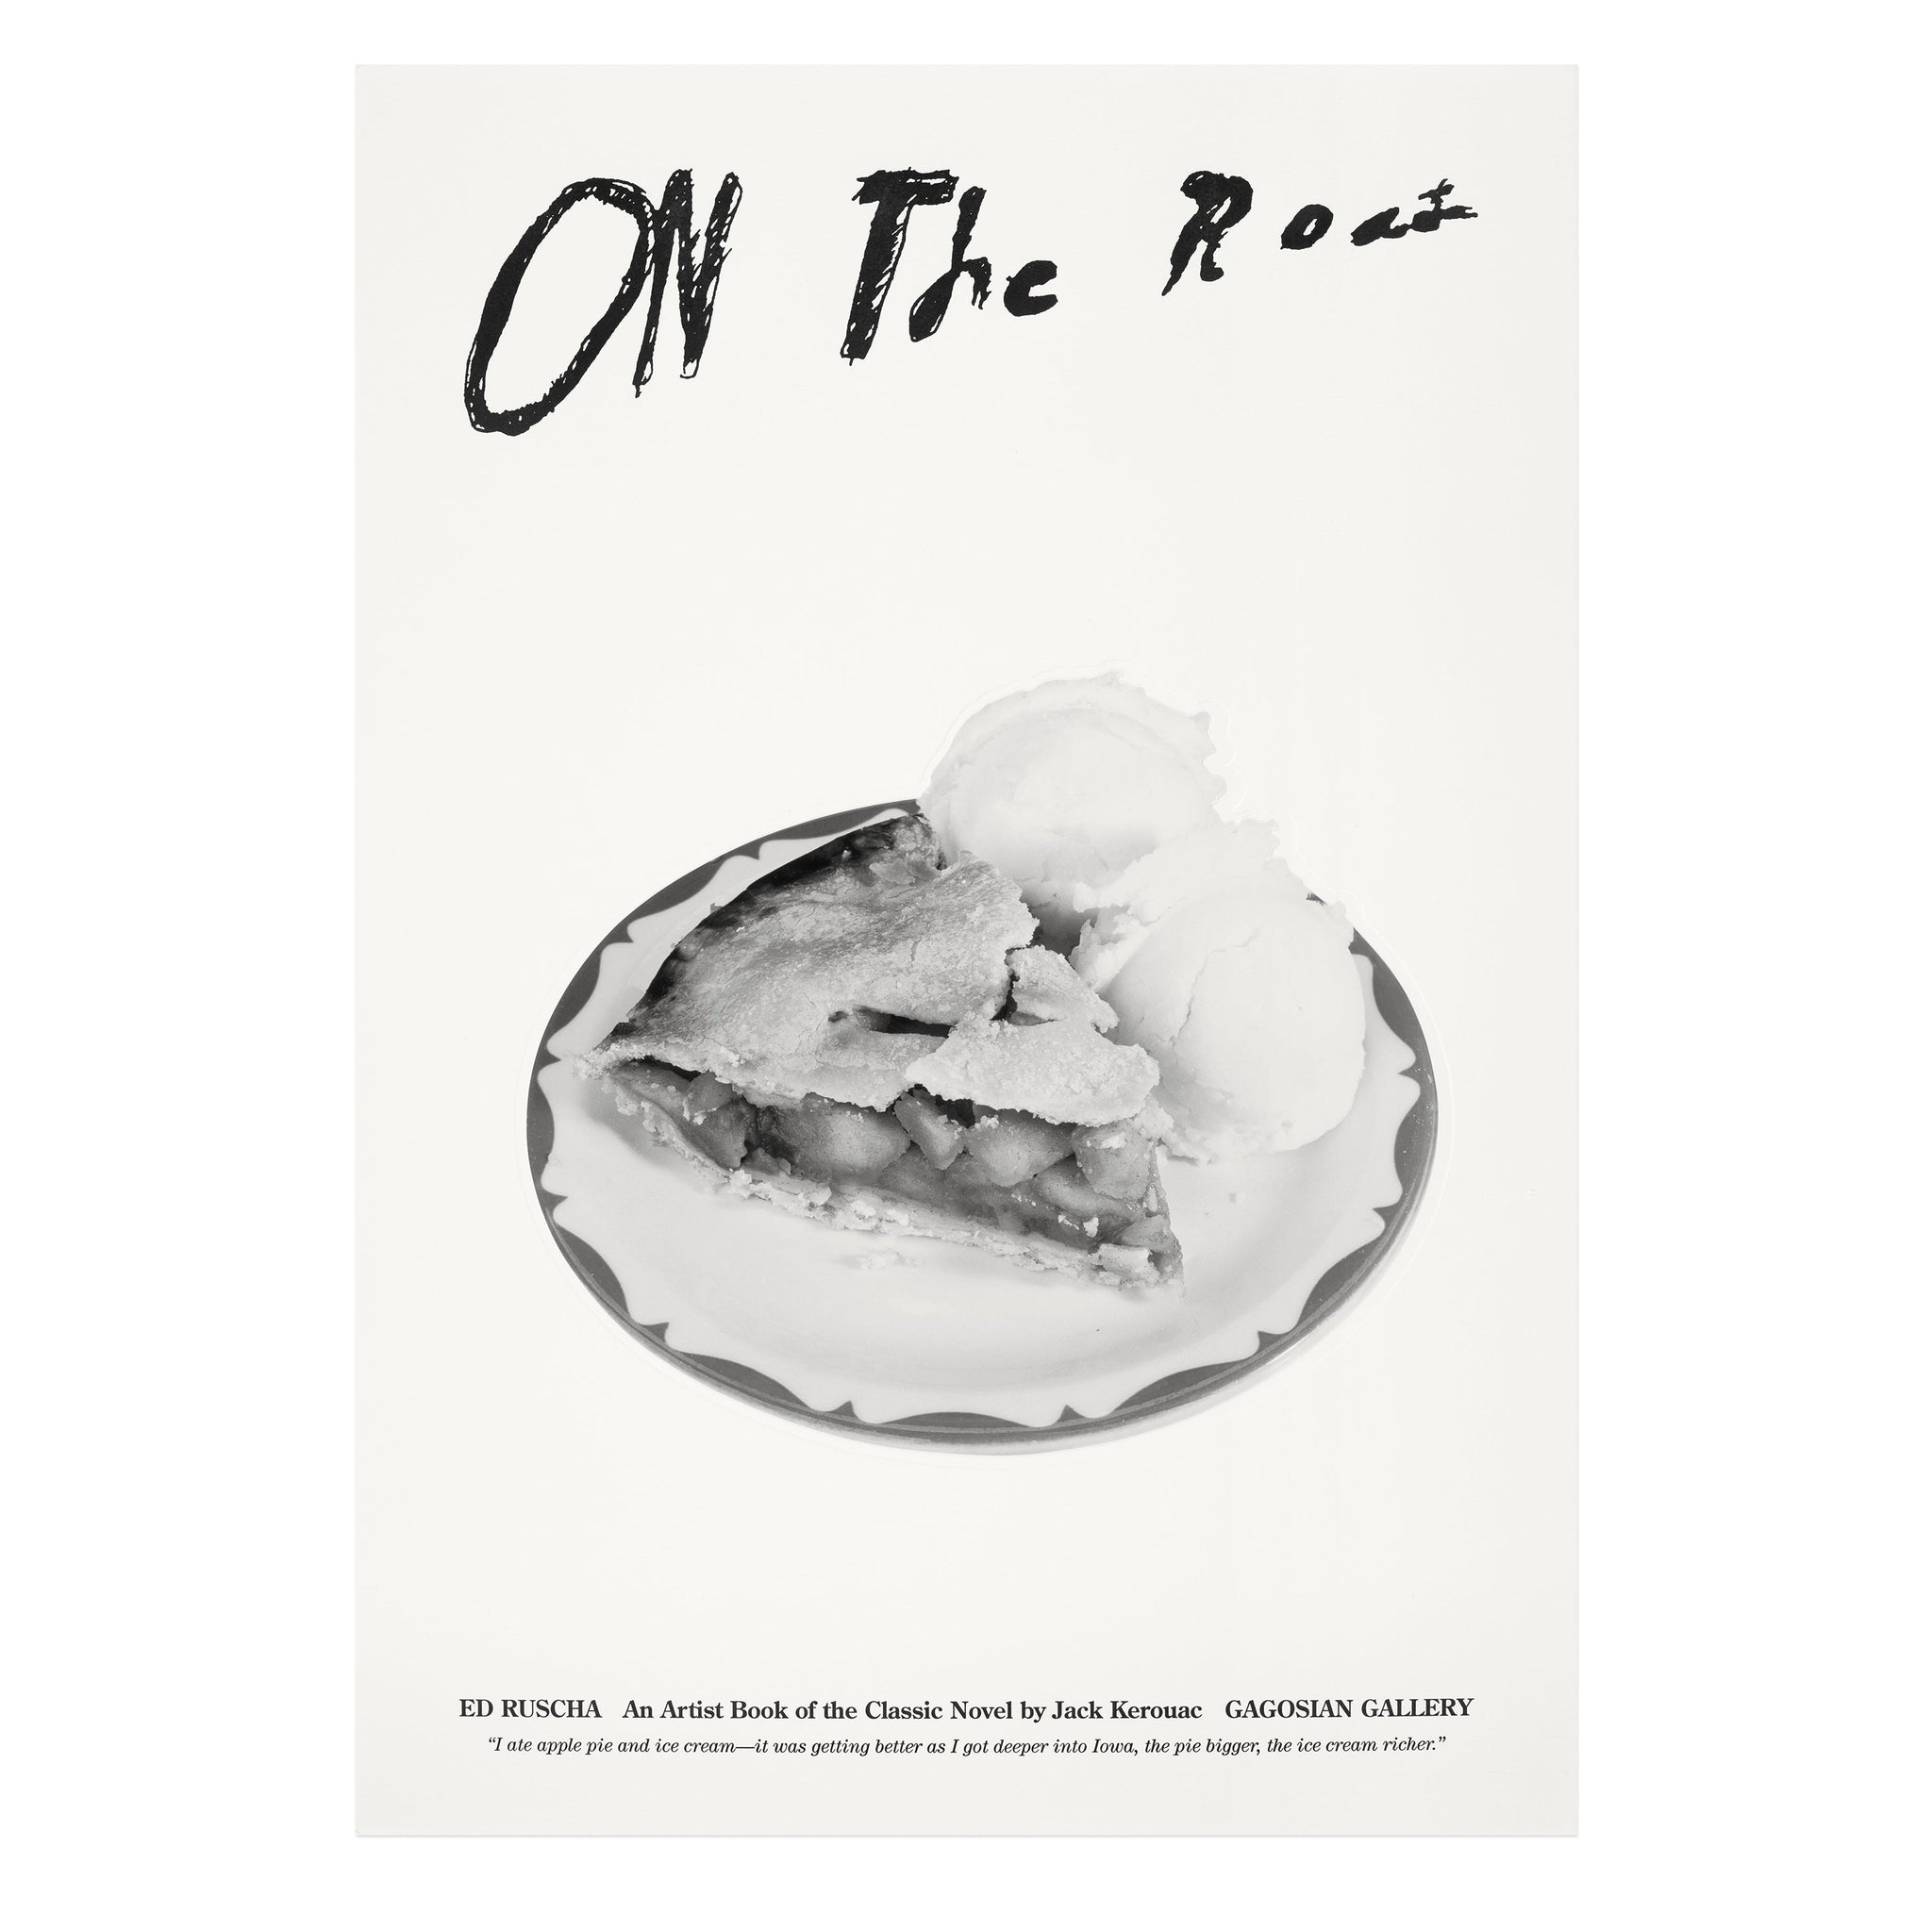 Ed Ruscha: On the Road print featuring a slice of apple pie